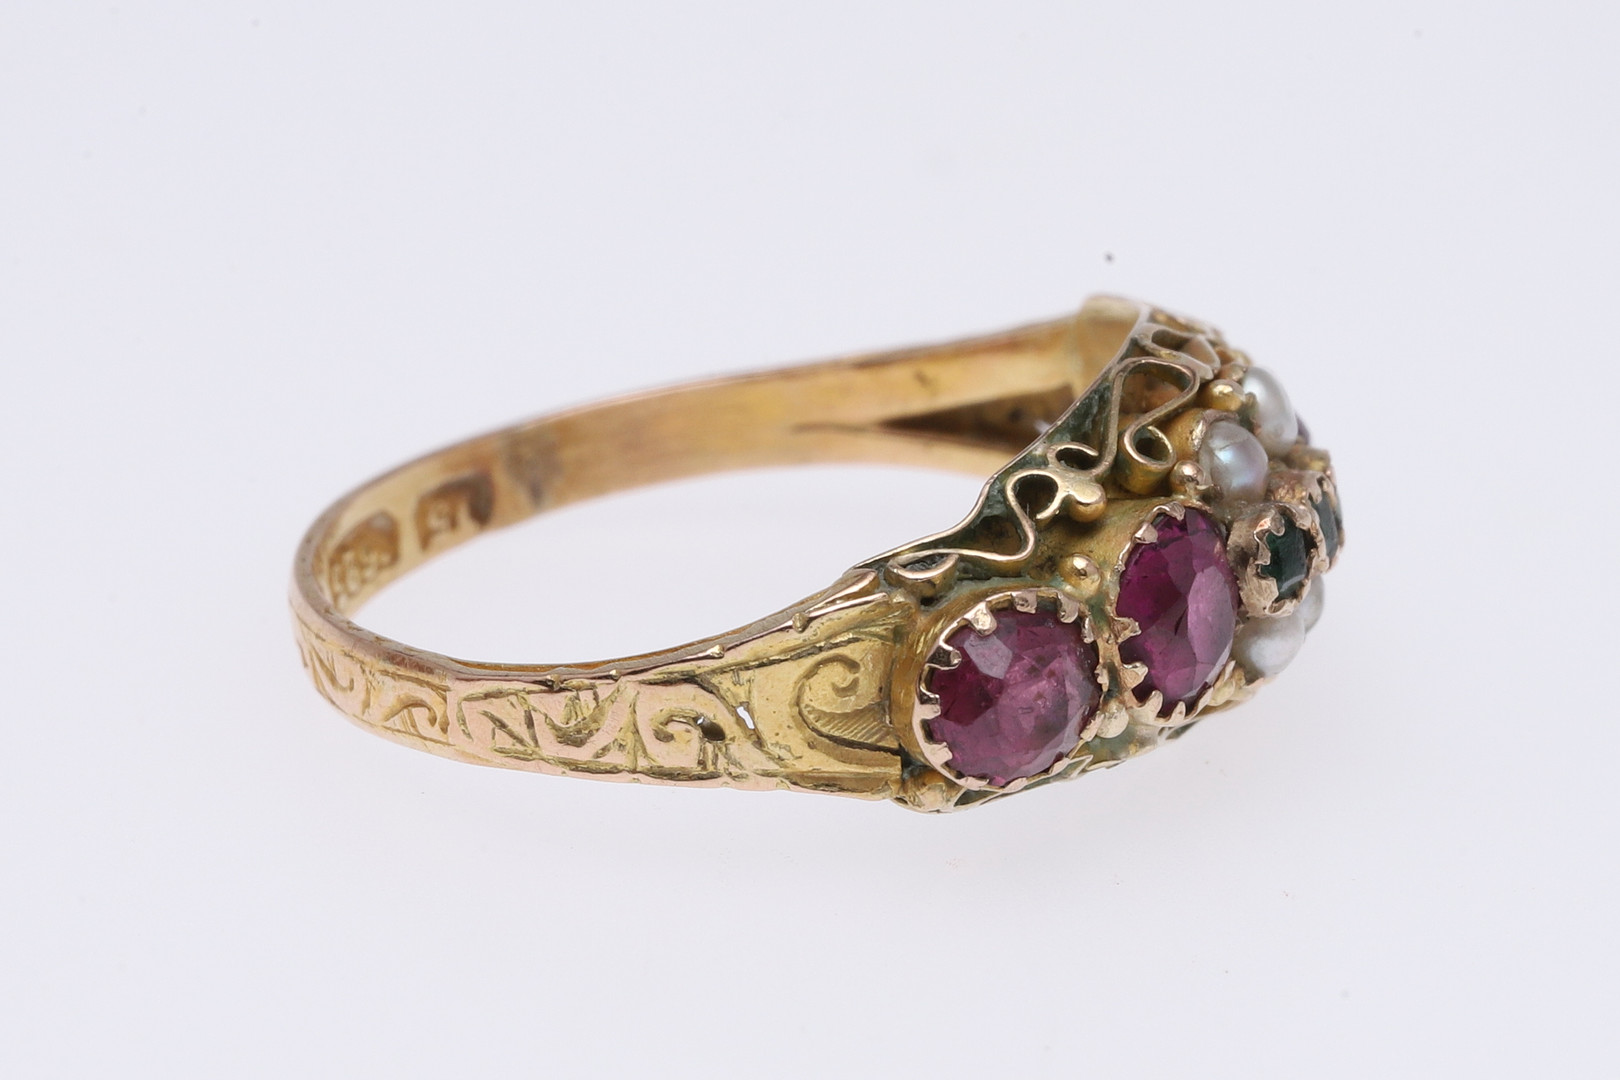 A VICTORIAN GARNET, EMERALD AND PEARL RING. - Image 4 of 5